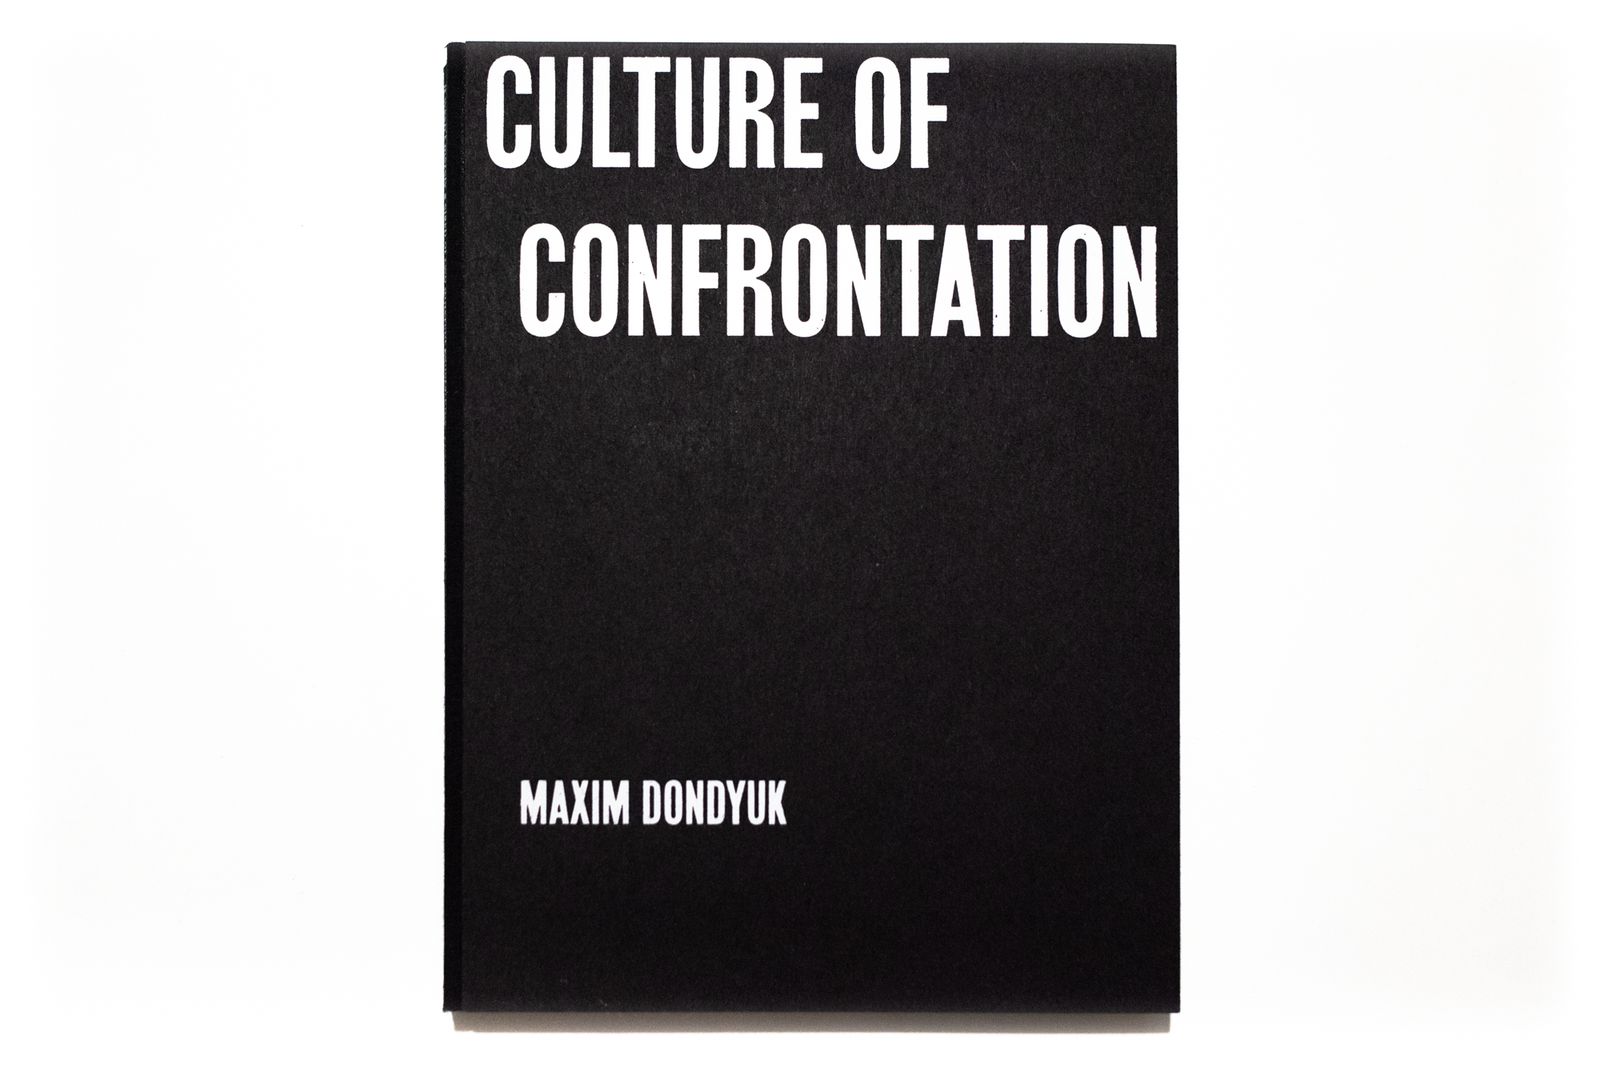 © Maxim Dondyuk - Image from the PHOTO BOOK "CULTURE OF CONFRONTATION" photography project